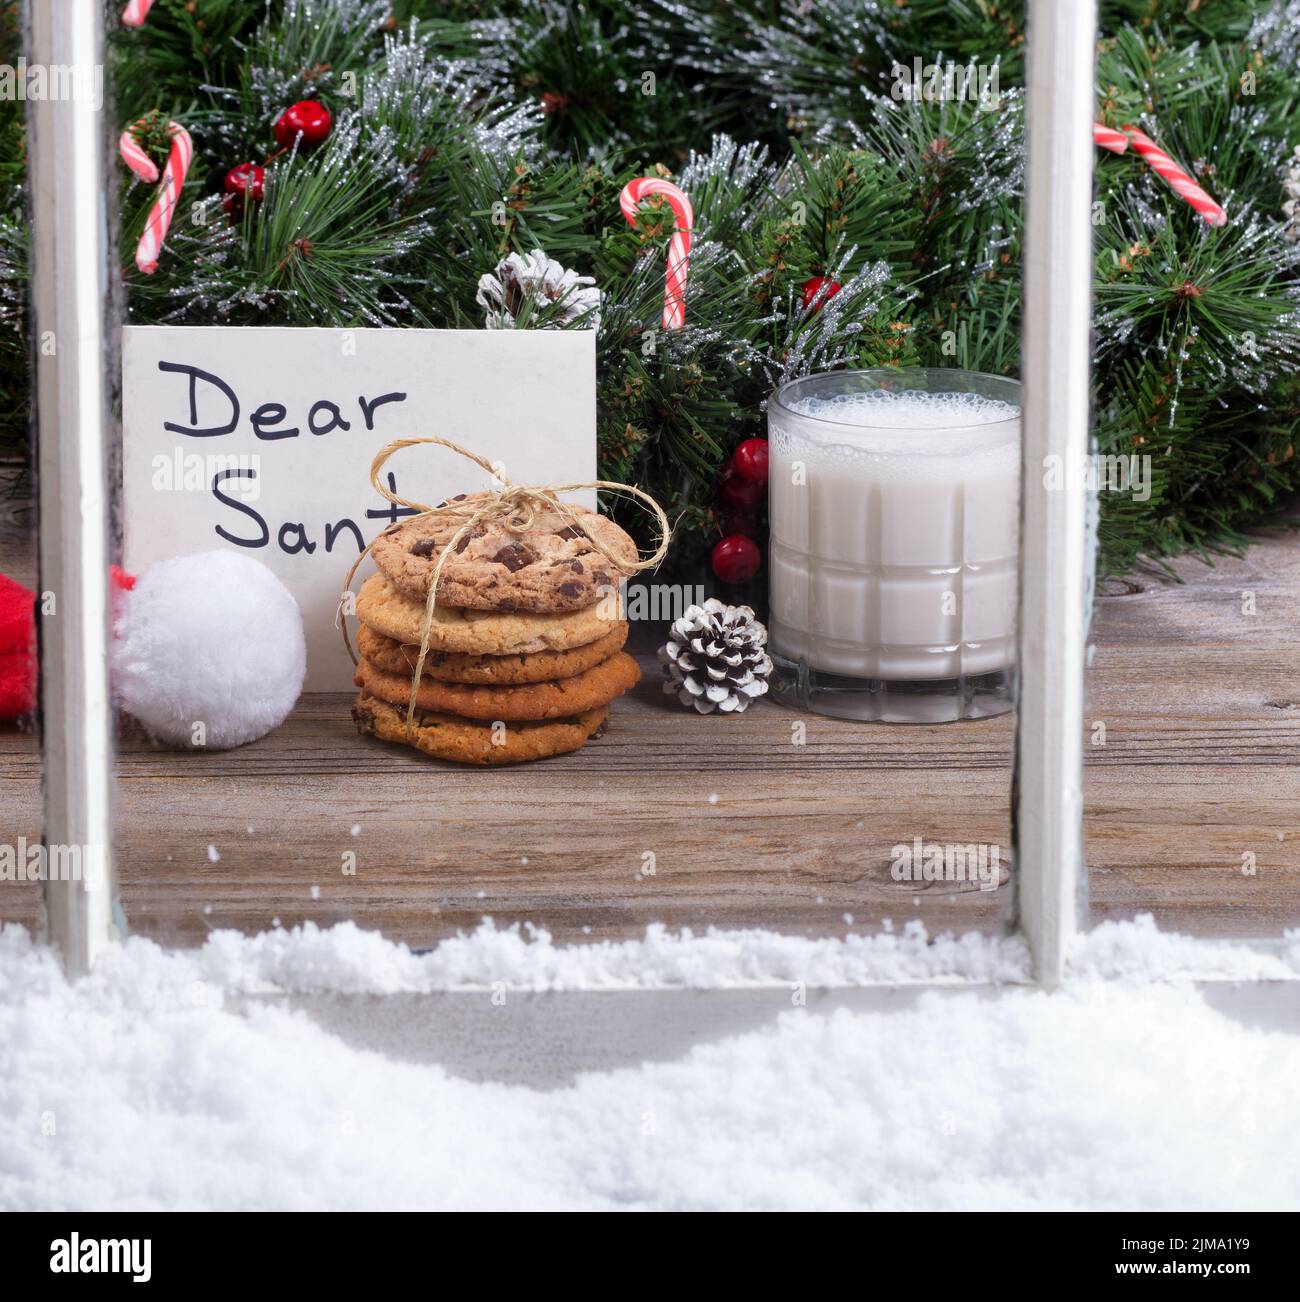 Snowy window view of cookies and milk plus card for Santa Claus with holiday decorations in background Stock Photo